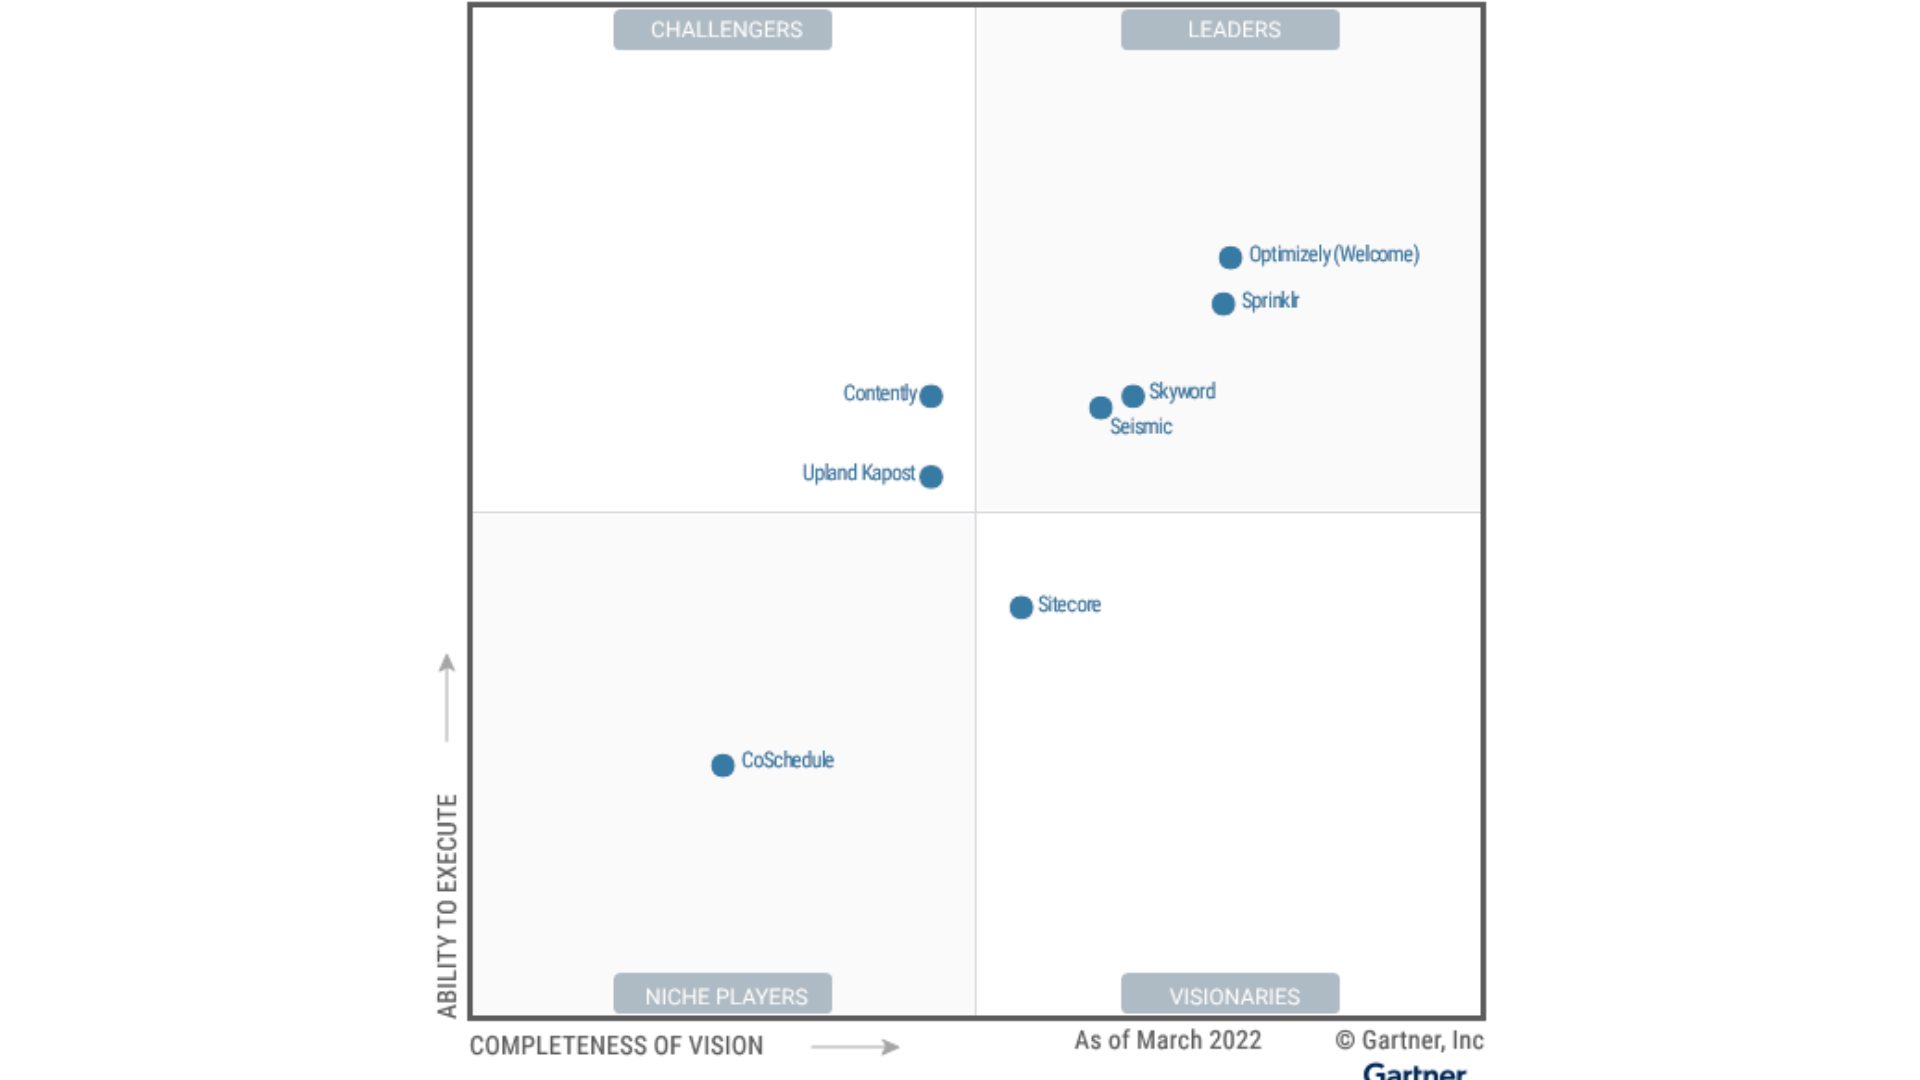 Optimizely software) named leader in 2022 Magic Quadrant for